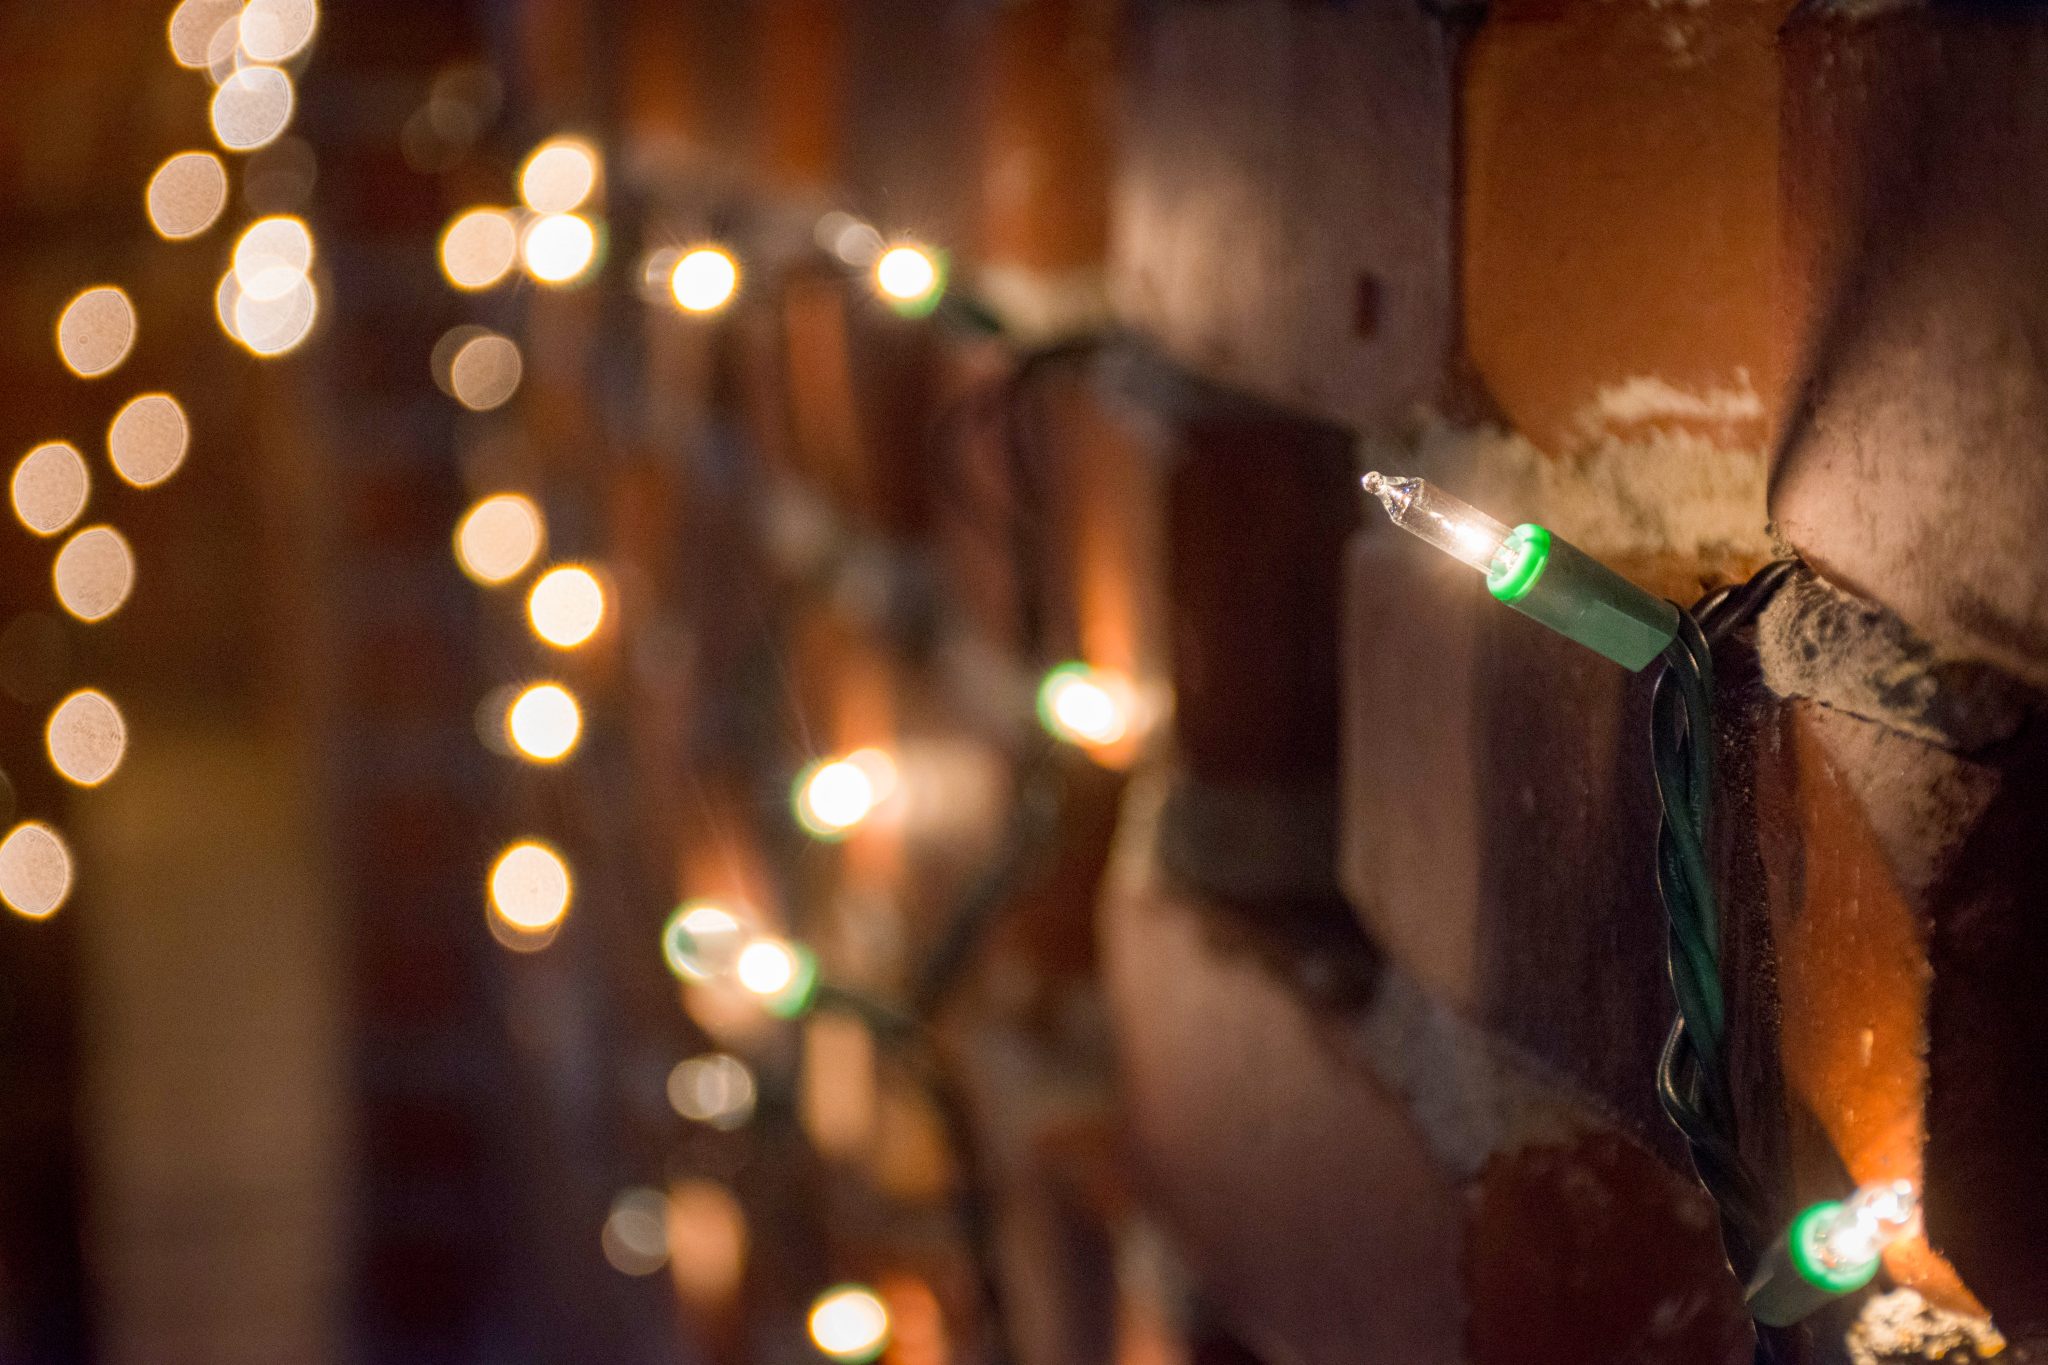 Small Christmas light on a brick wall with others in the background